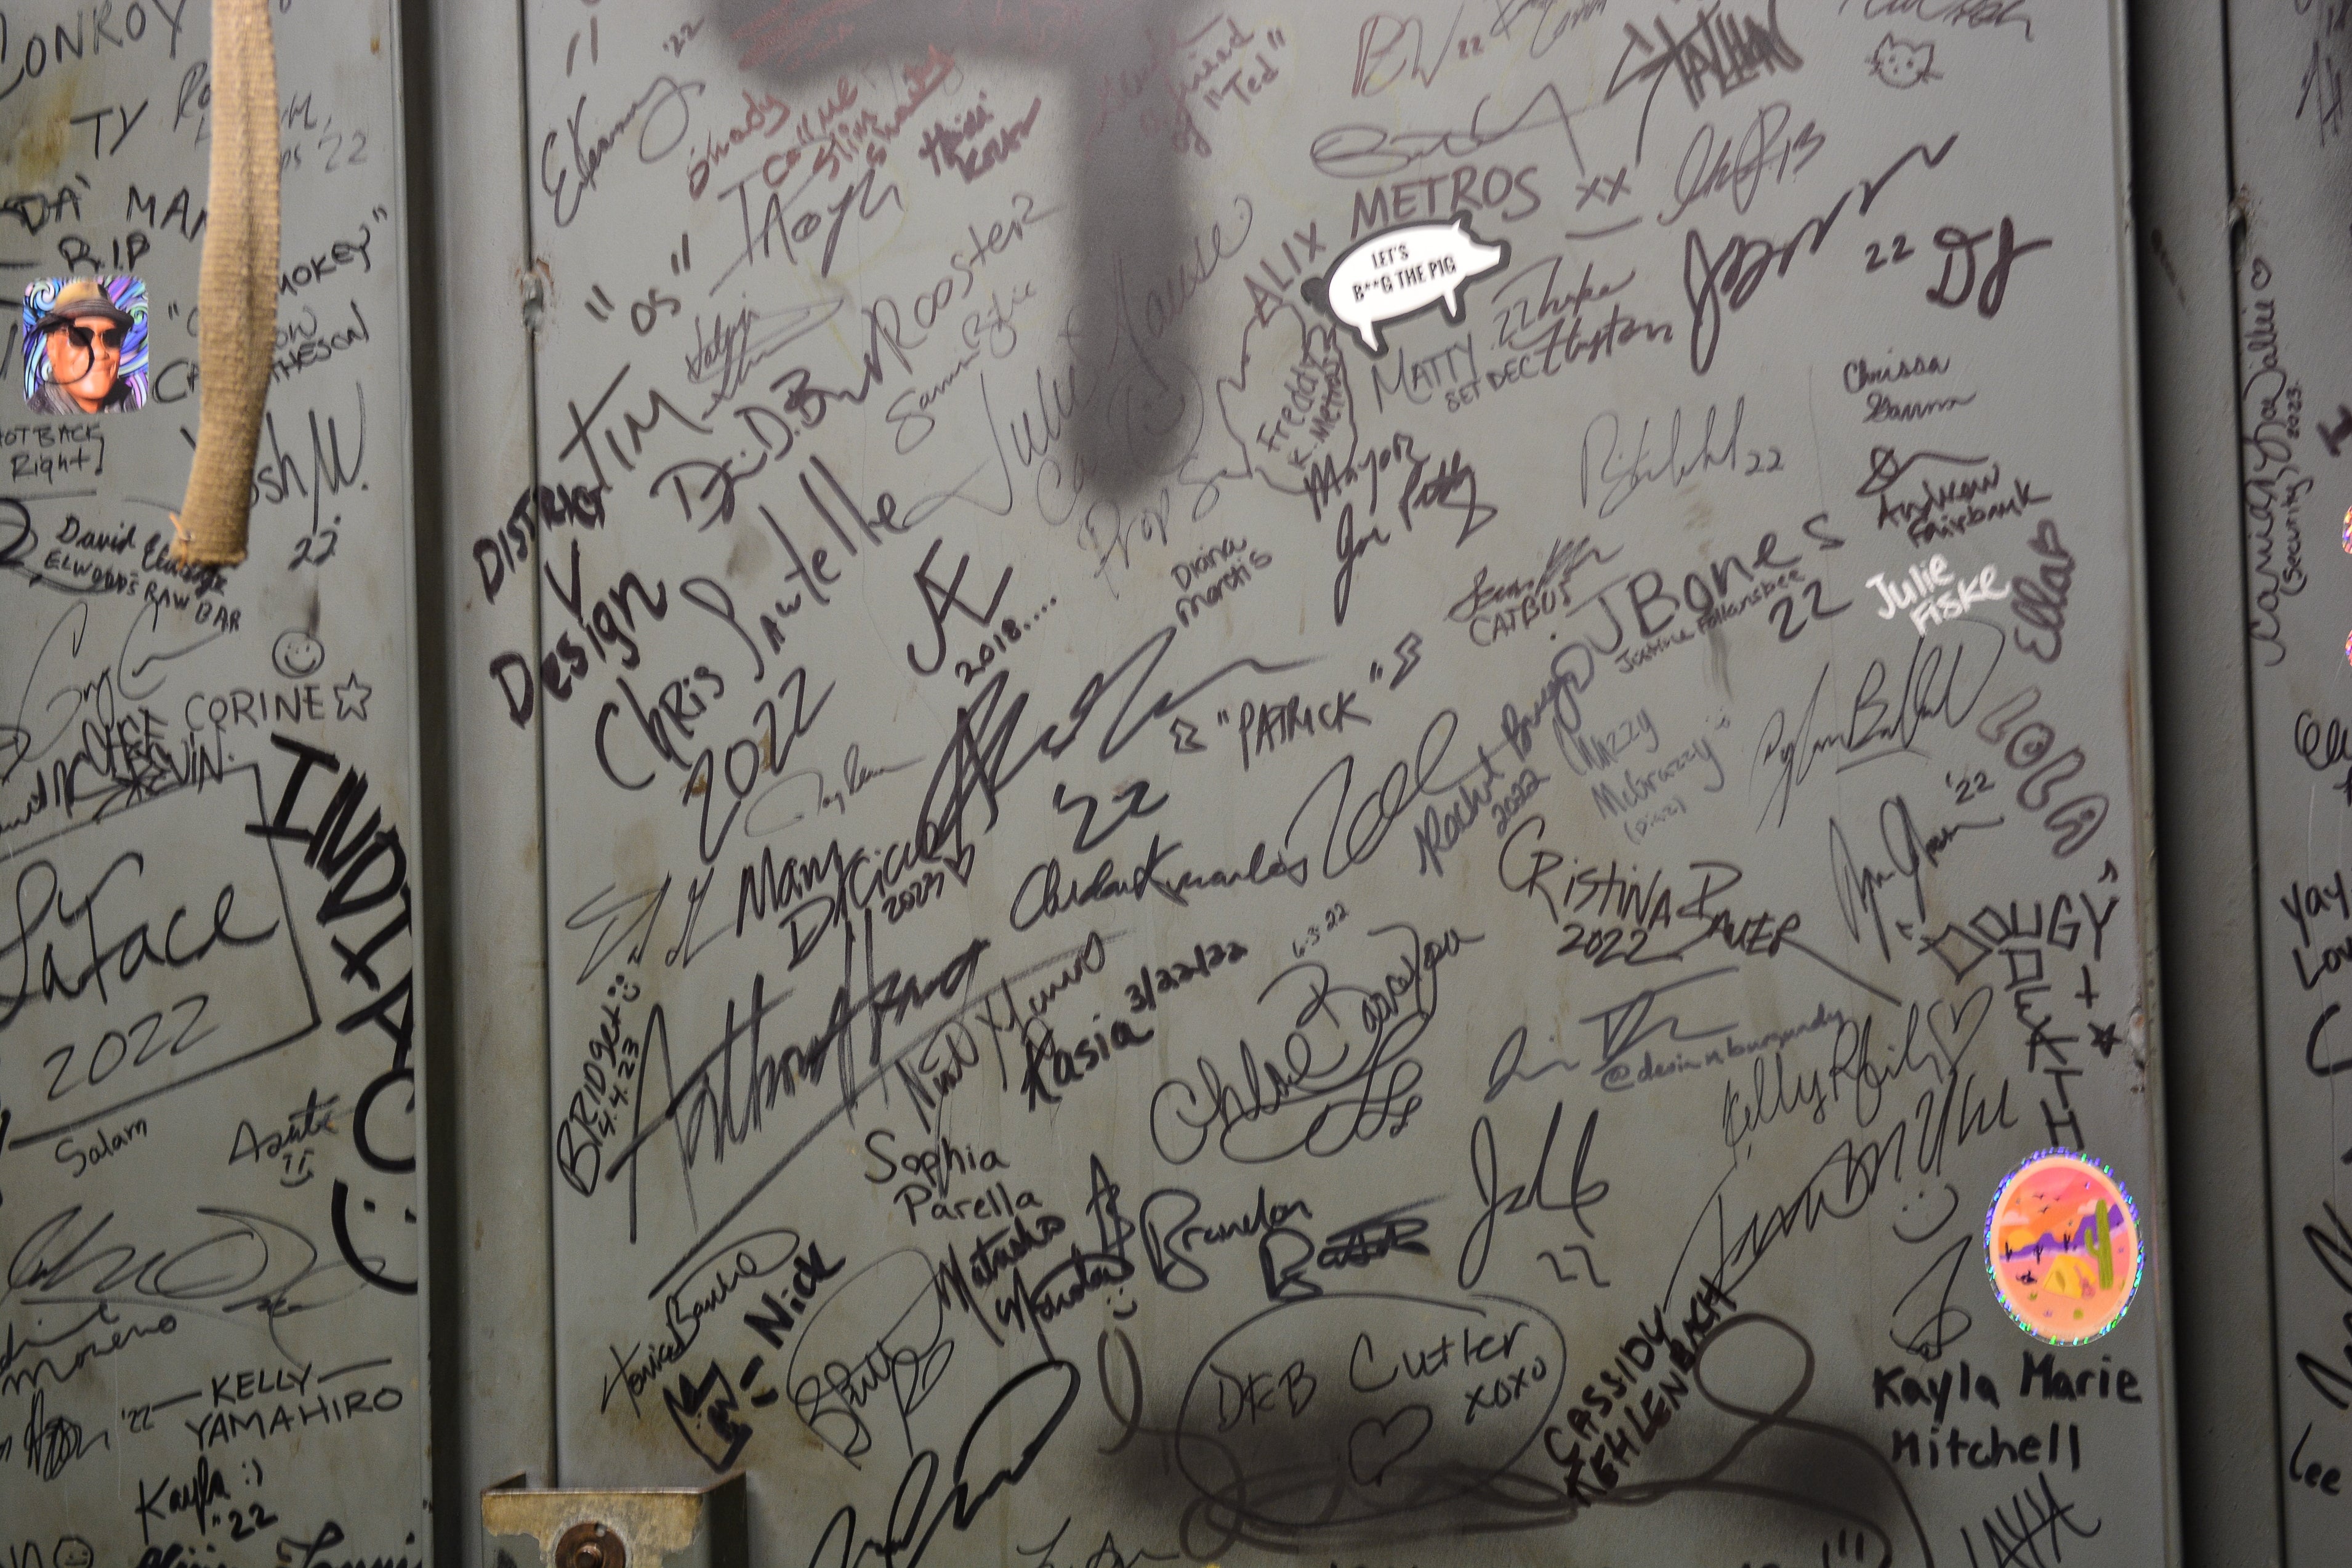 A large amount of signatures on the door of a freight elevator.